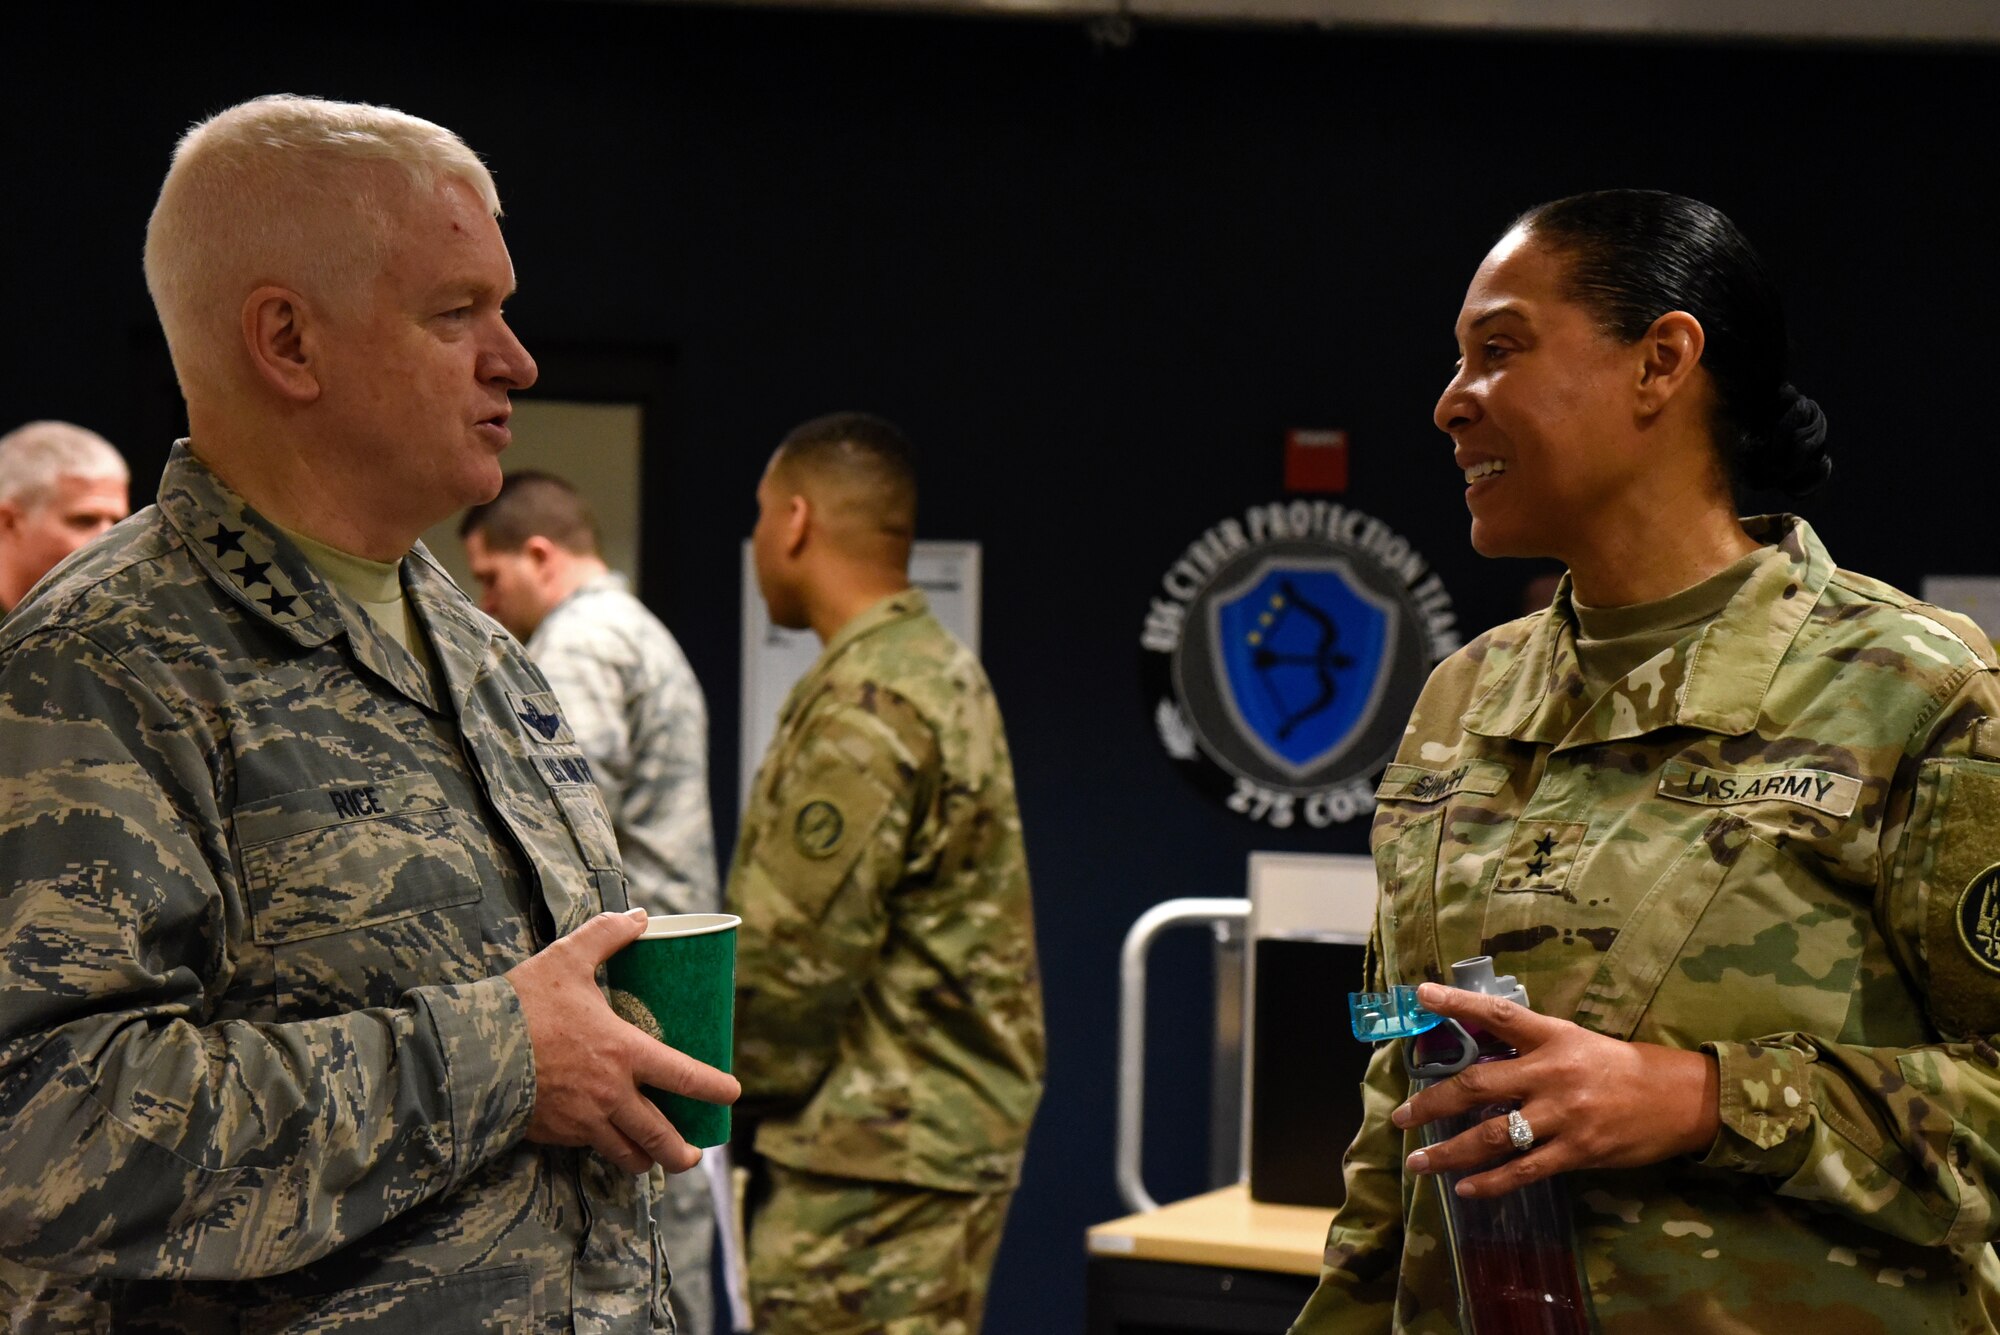 Air Force Lt. Gen. L. Scott Rice, the Director of the Air National Guard, speaks with Army Maj. Gen. Linda L. Singh, Maryland adjutant general, February 10, 2018 while touring Warfield Air National Guard Base, Middle River, Md.